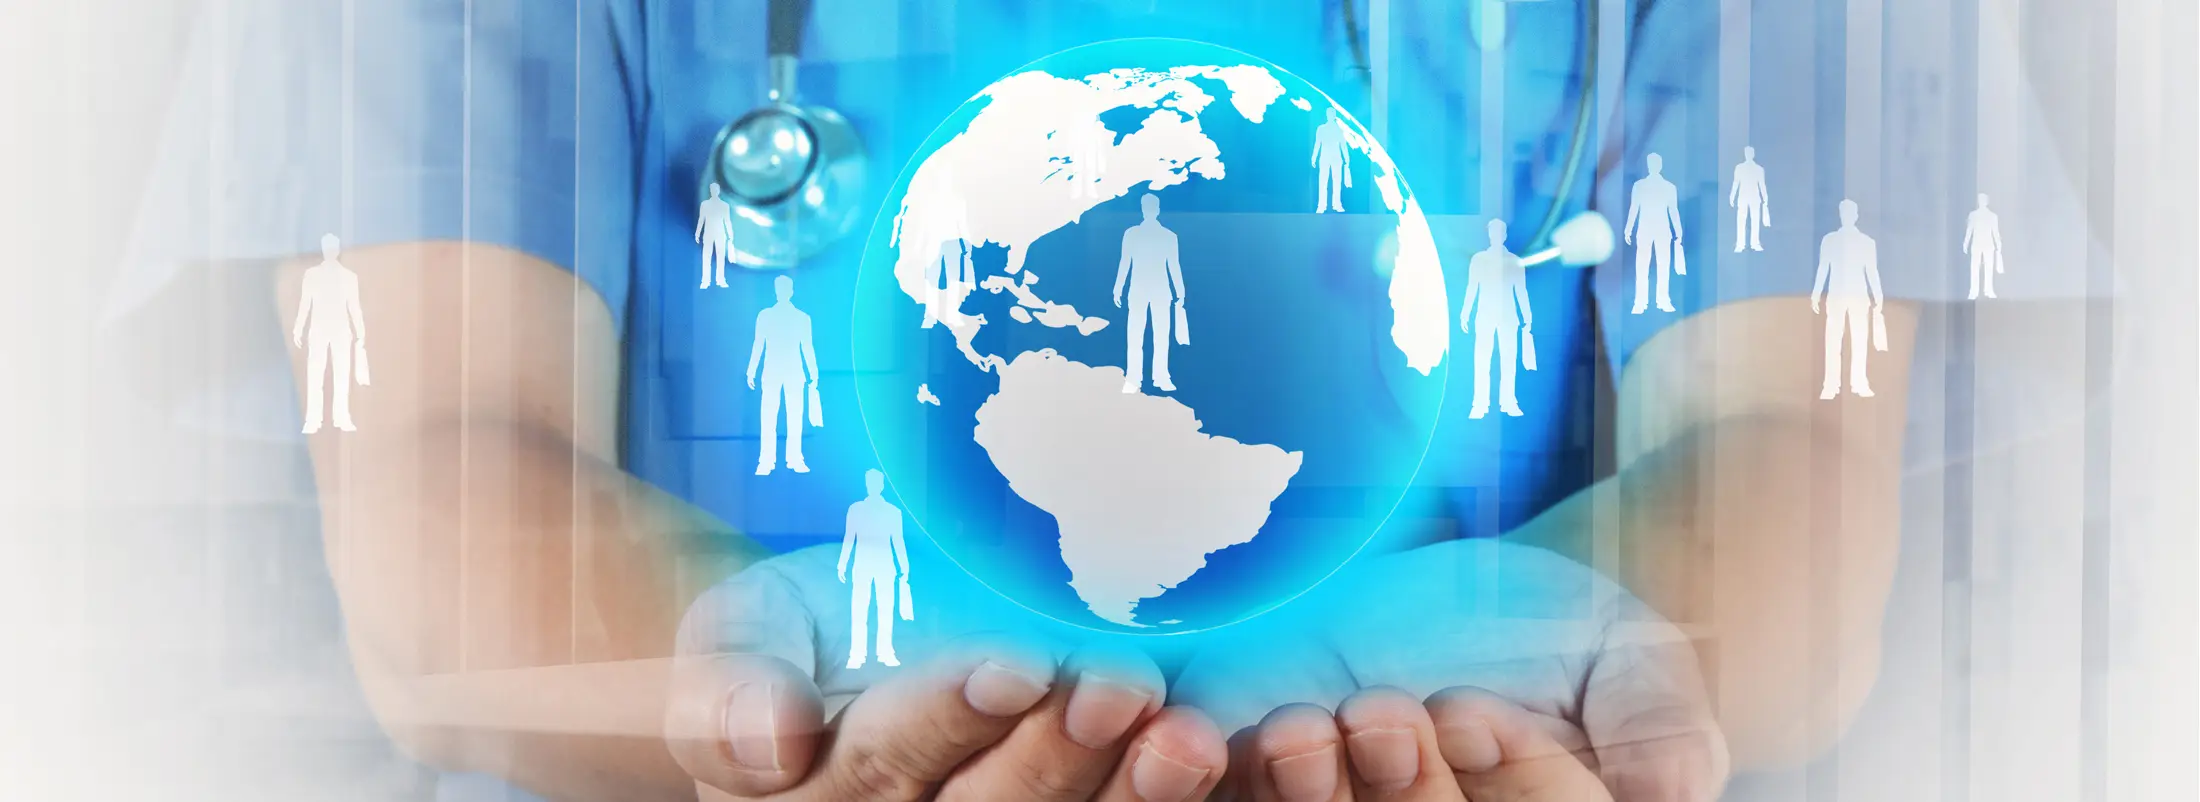 Providing worldwide consumer-driven health care through a delivery system of social media.